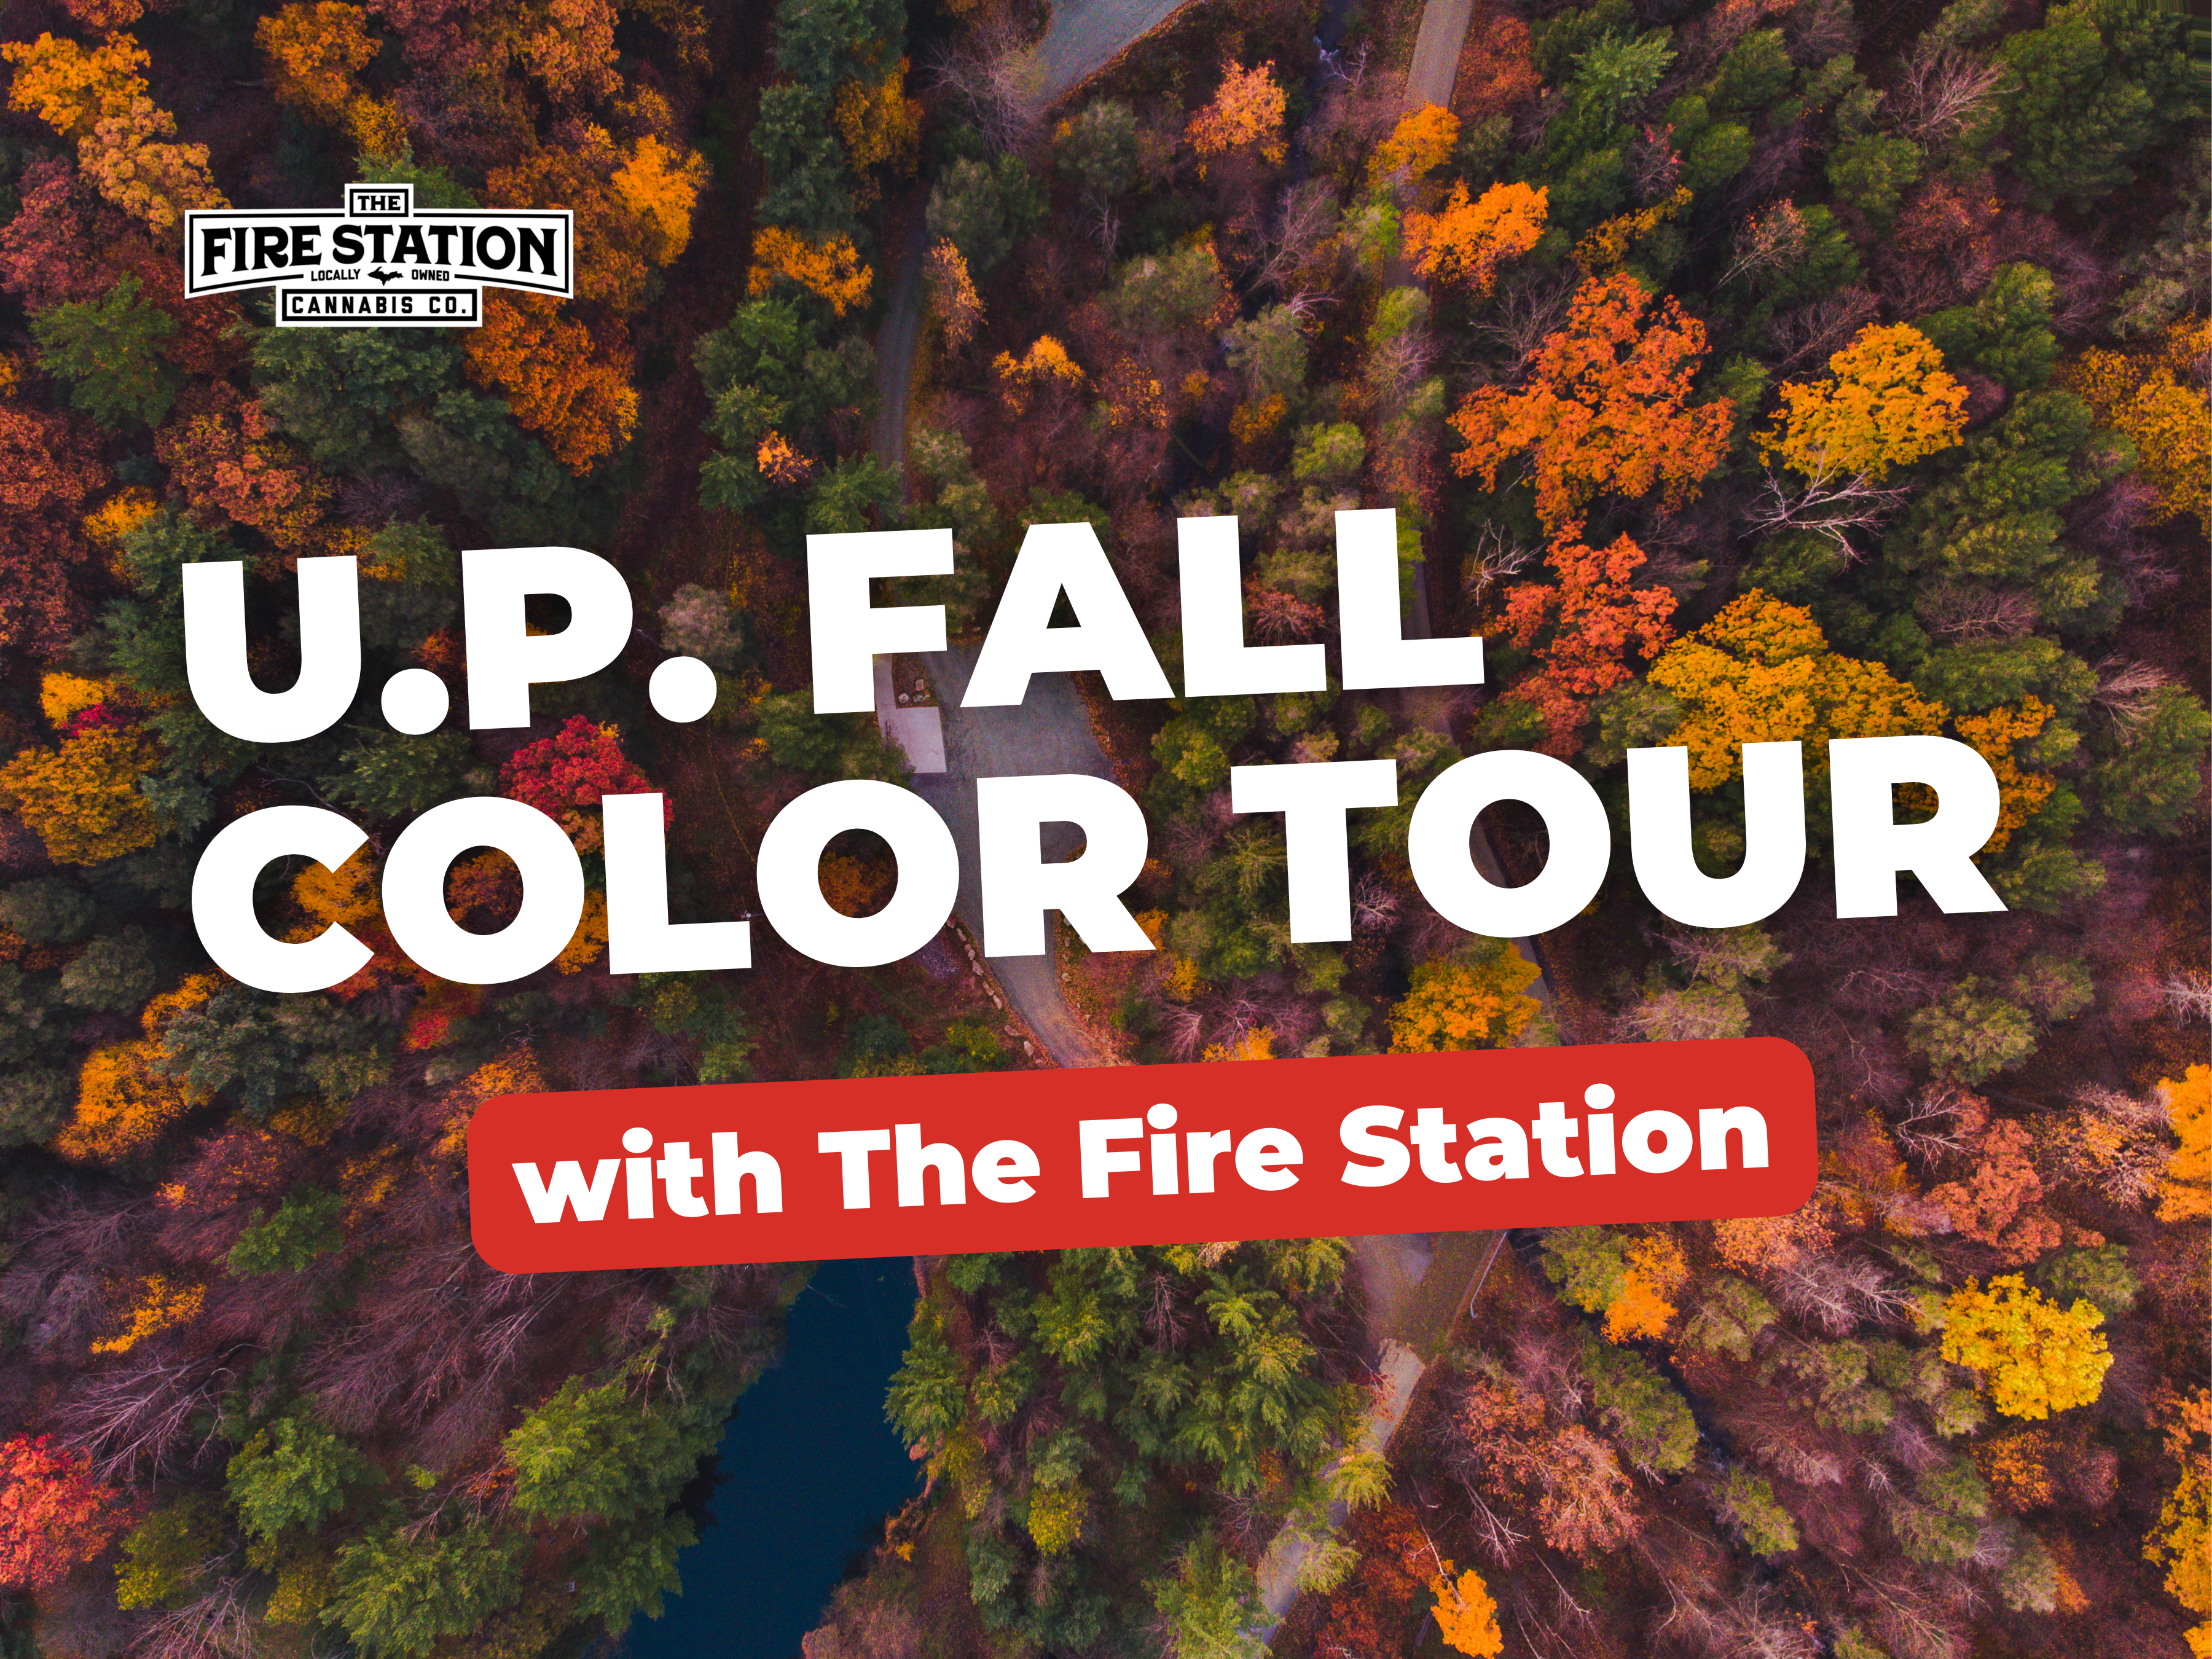 U.P. Fall Color Tour with The Fire Station